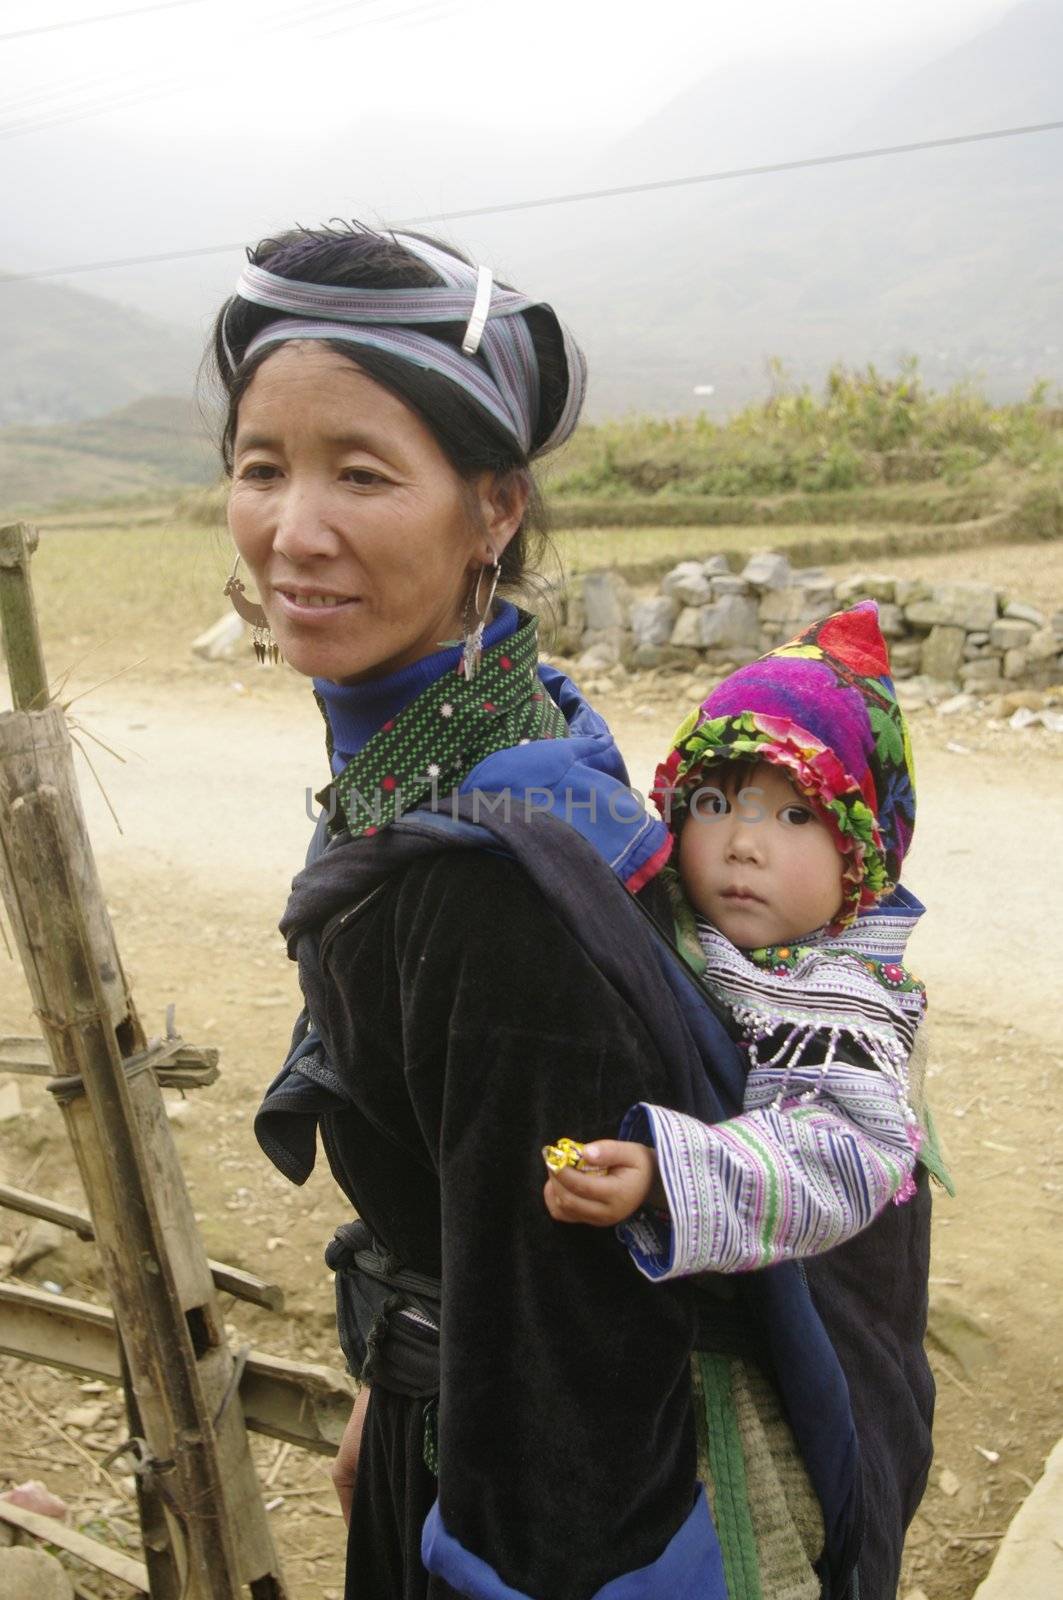 Black Hmong ethnic  woman and baby by Duroc